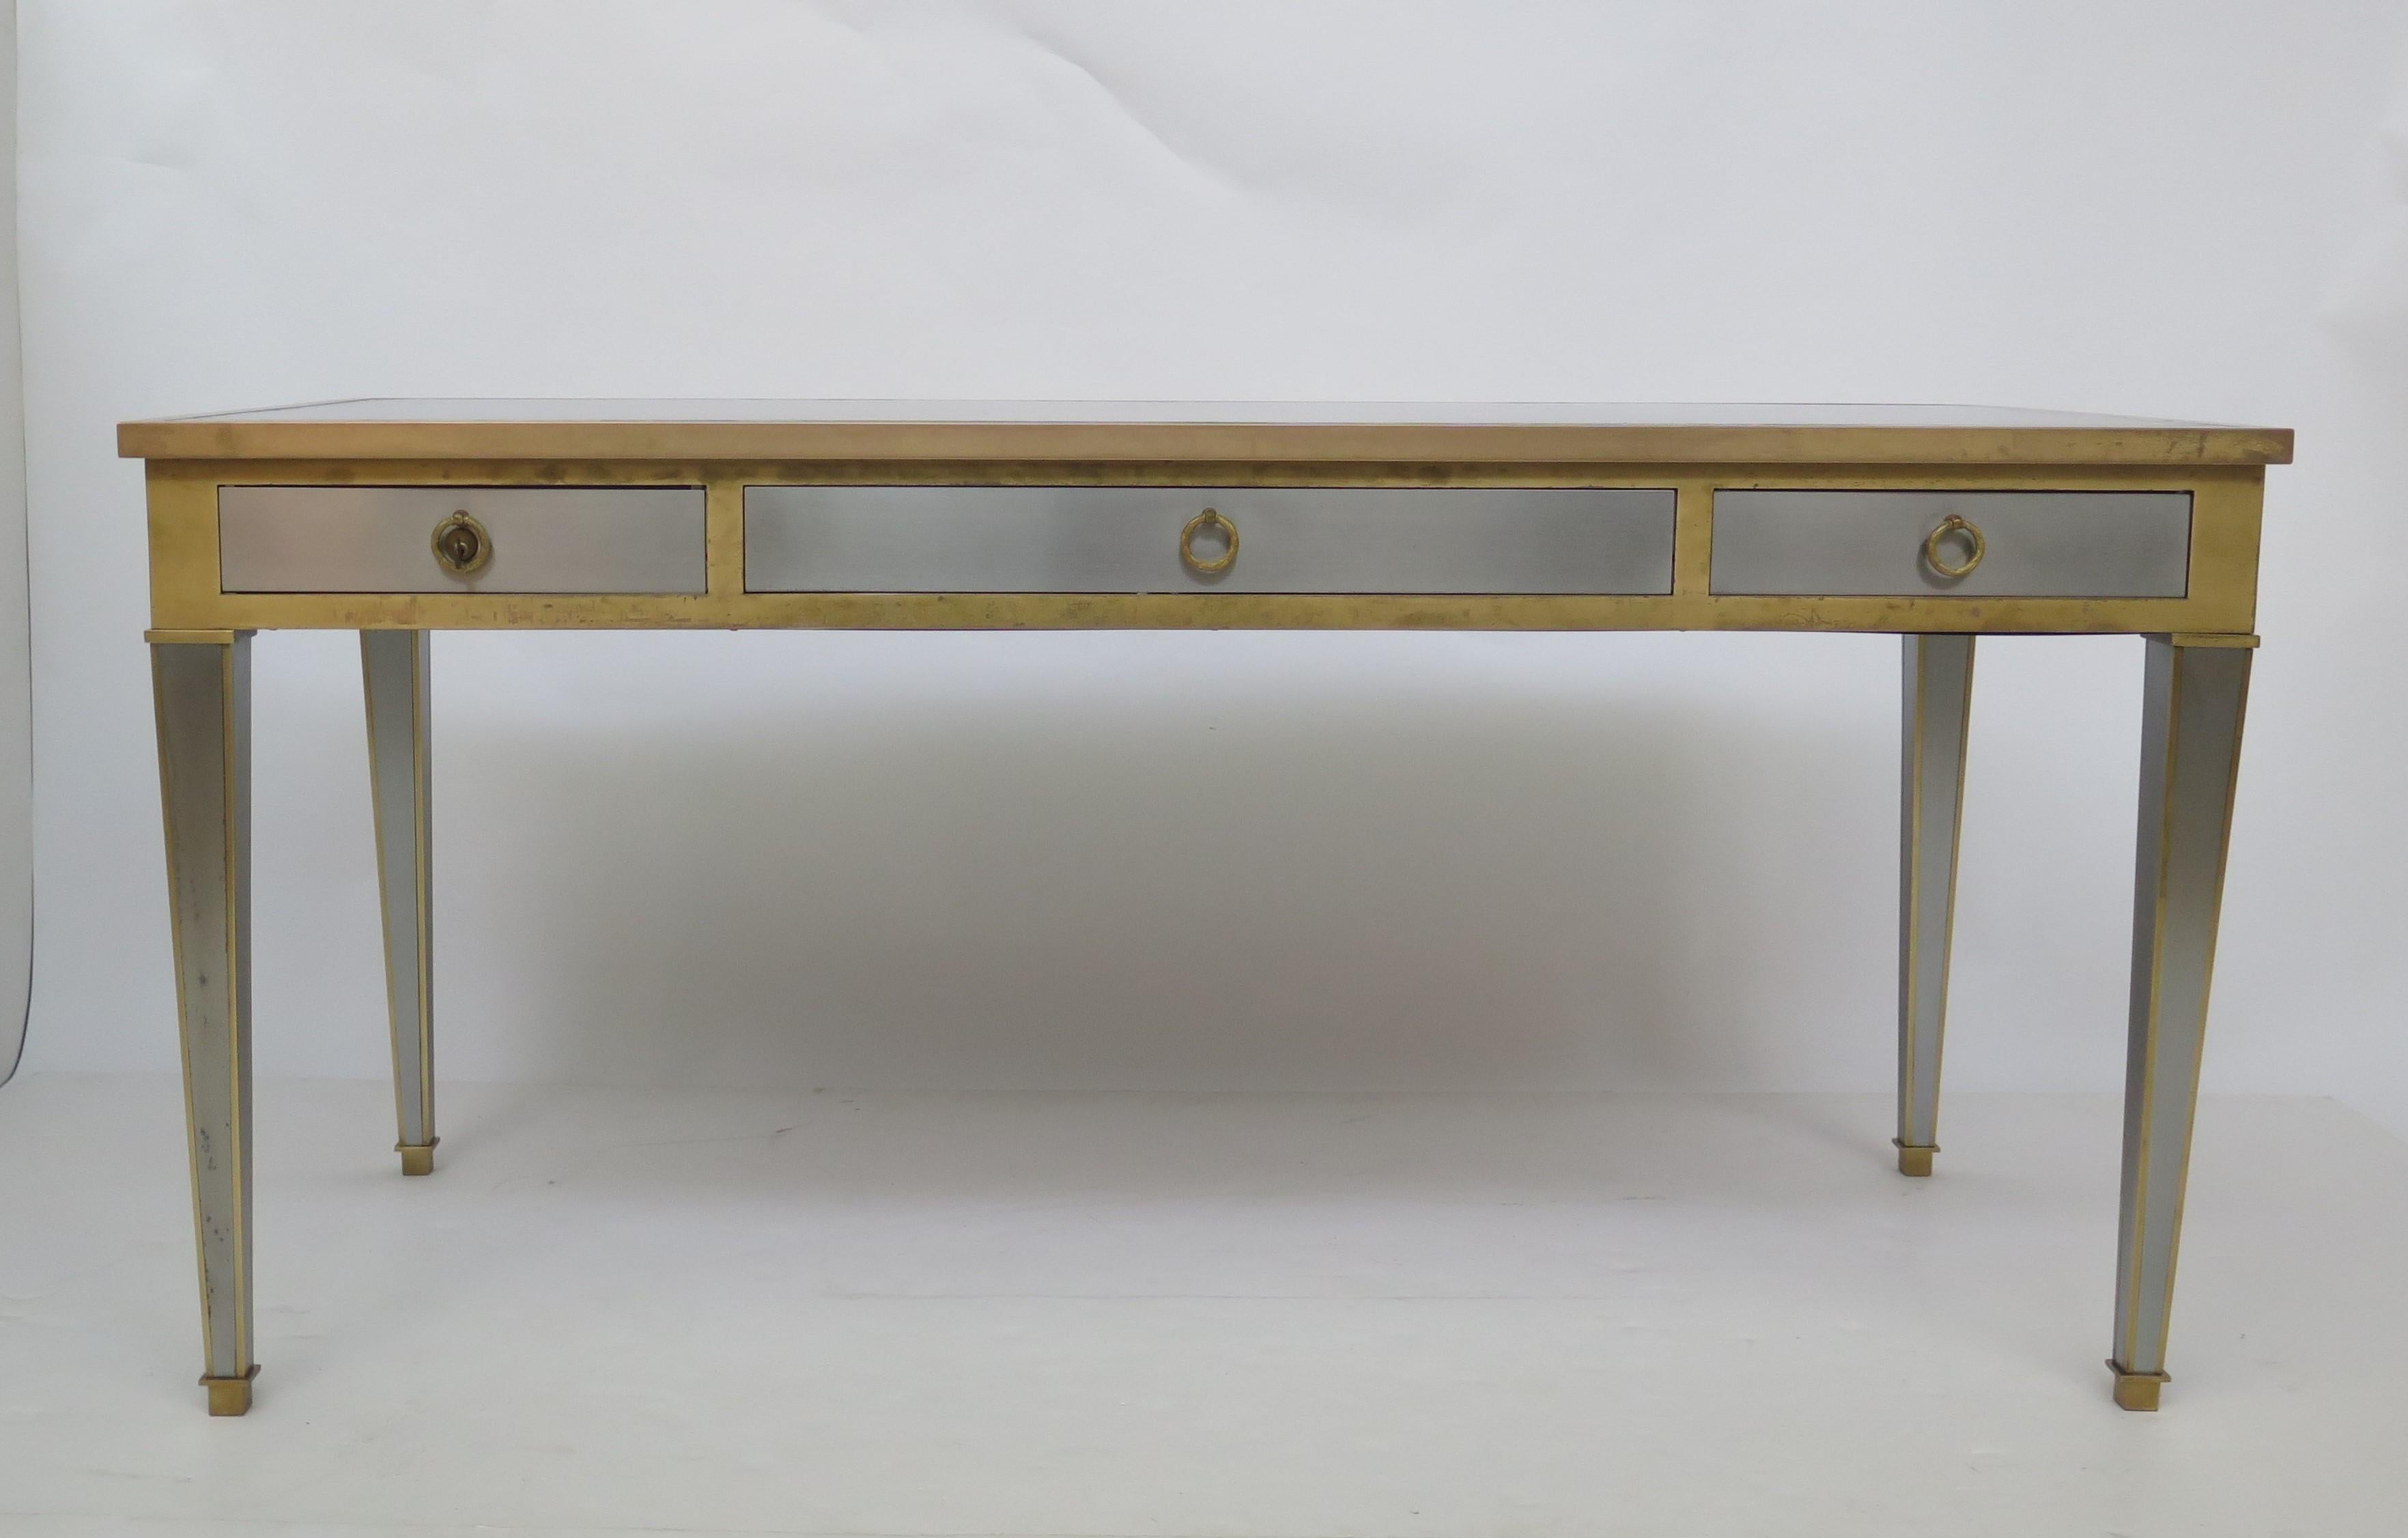 A midcentury Louis XVI inspired bureau plat of stainless steel and gilt bronze with original hand-tooled and gilt-embossed leather top, 3 lined drawers, far left drawer having a lock and key, hardware cast by P.E. Guerin.

Similar to a Vesey